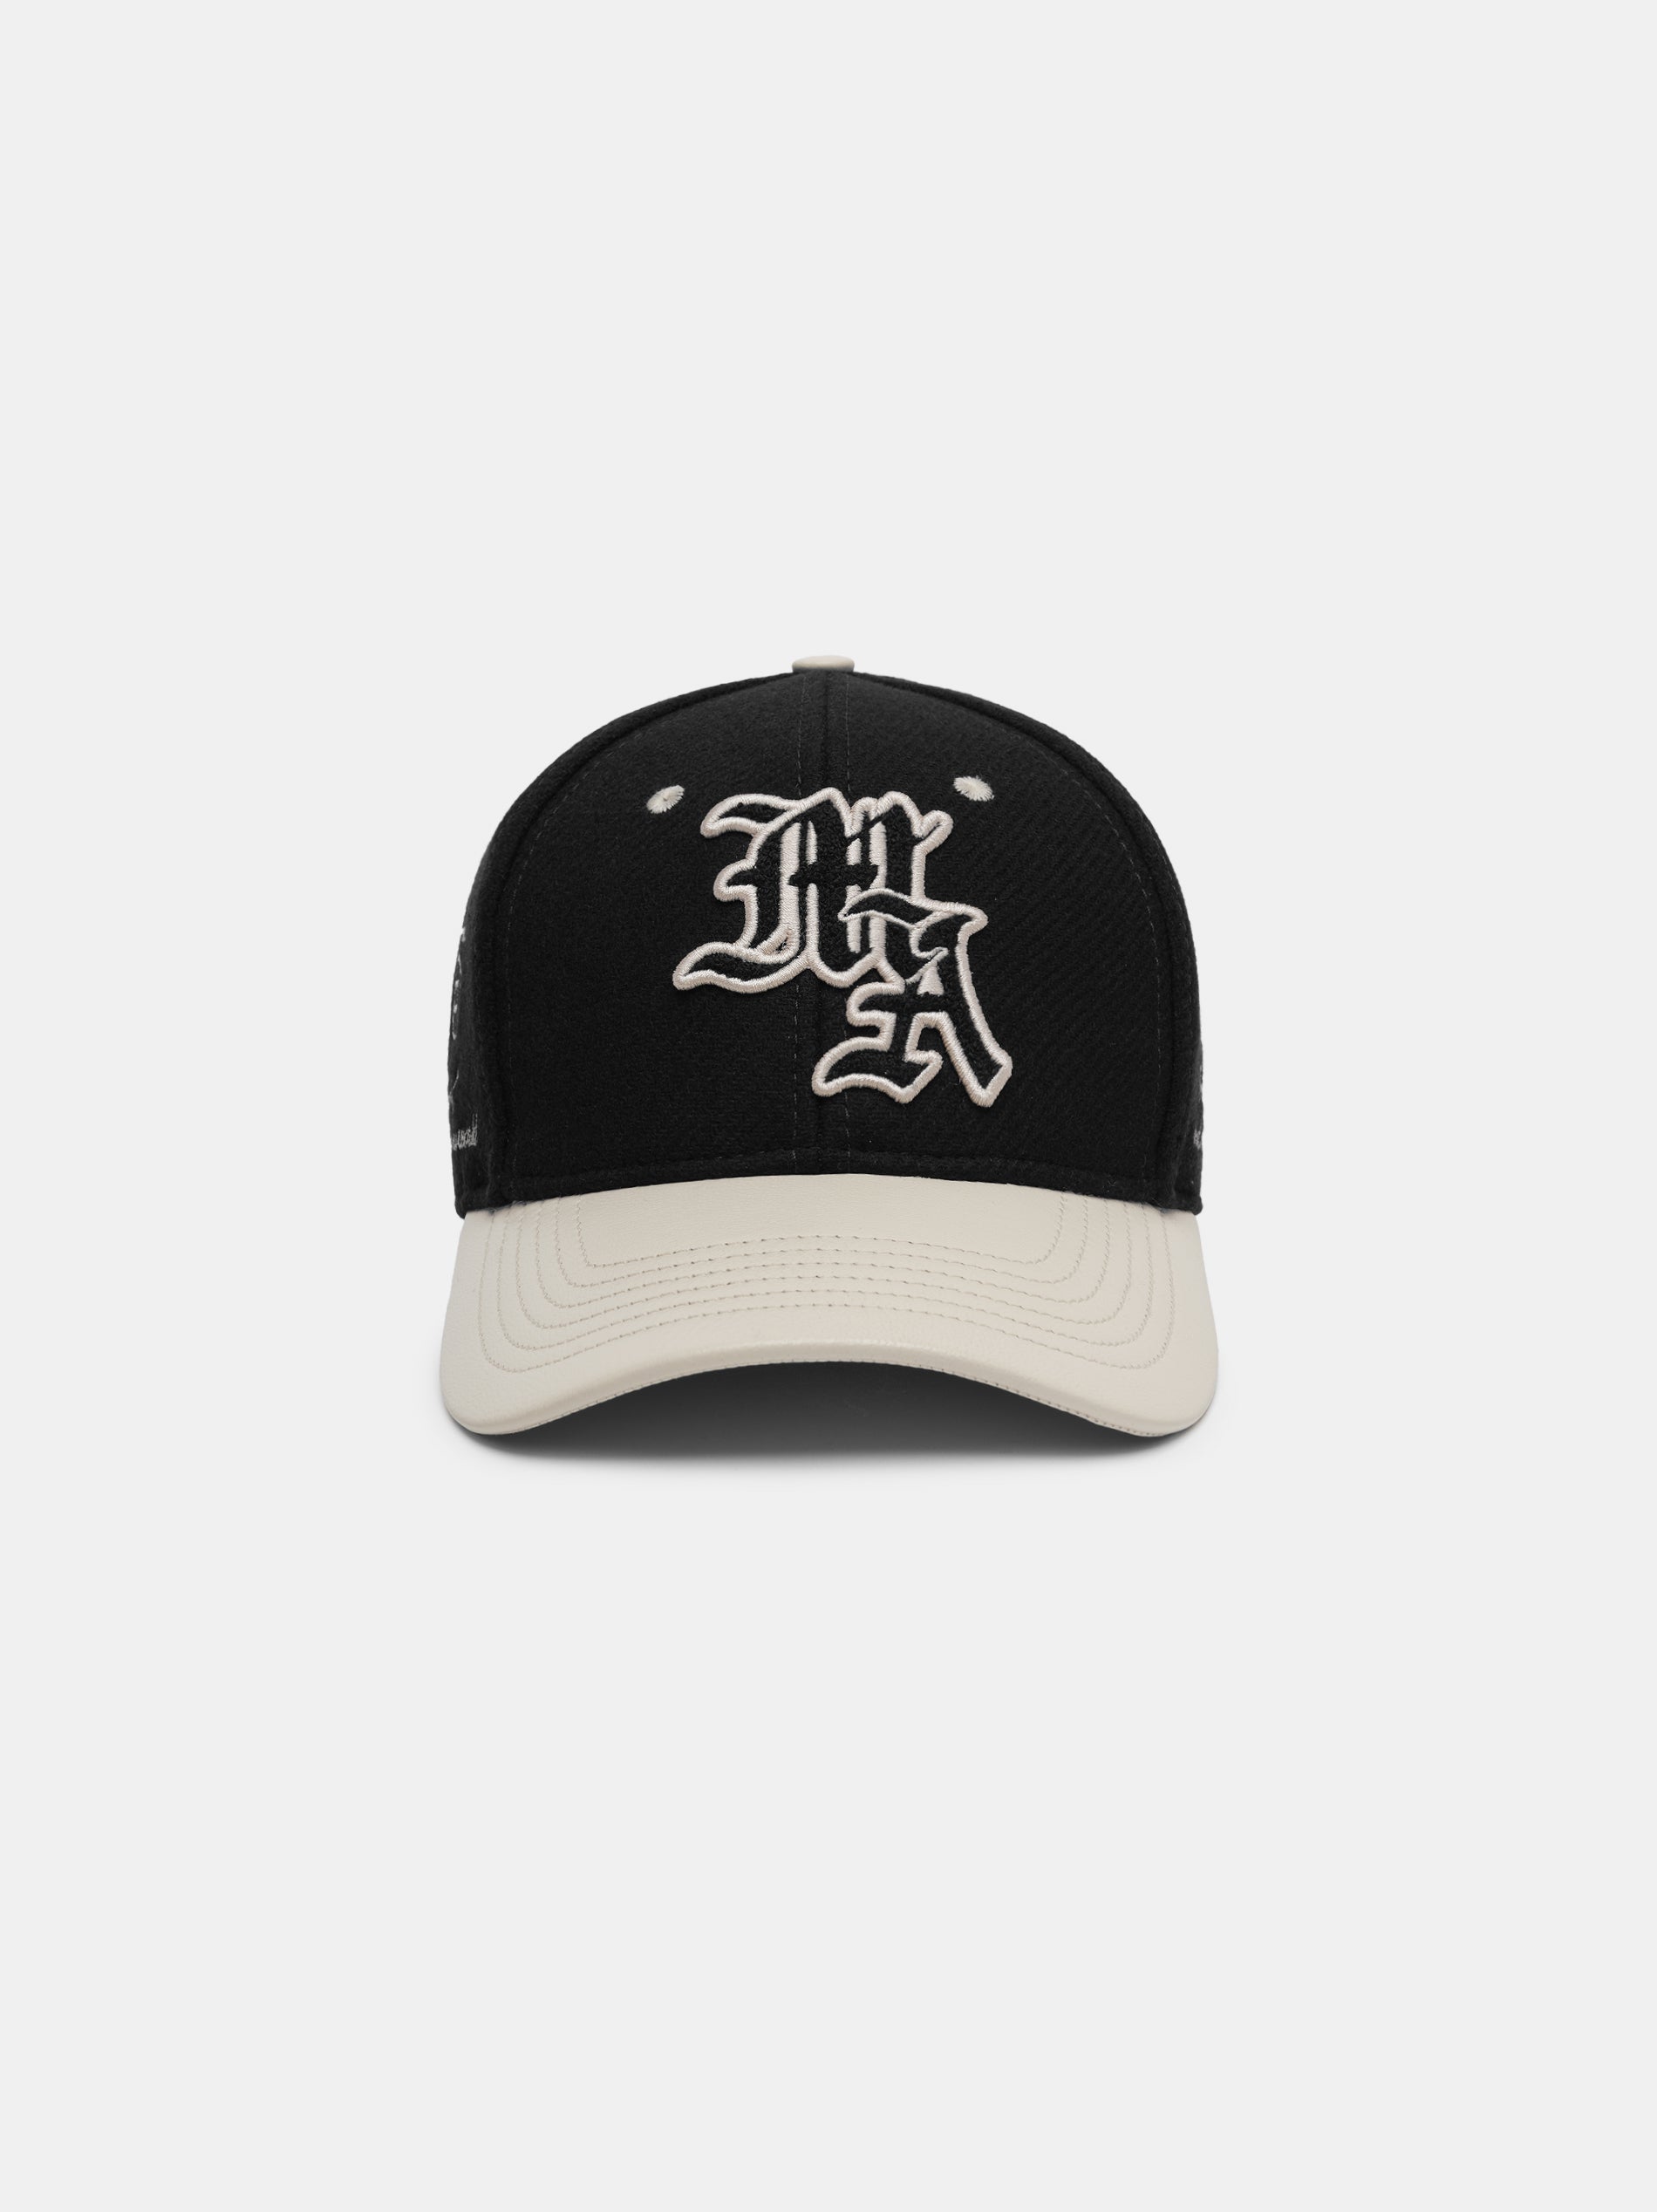 Product MA SPIRIT TWO-TONE HAT - Black featured image